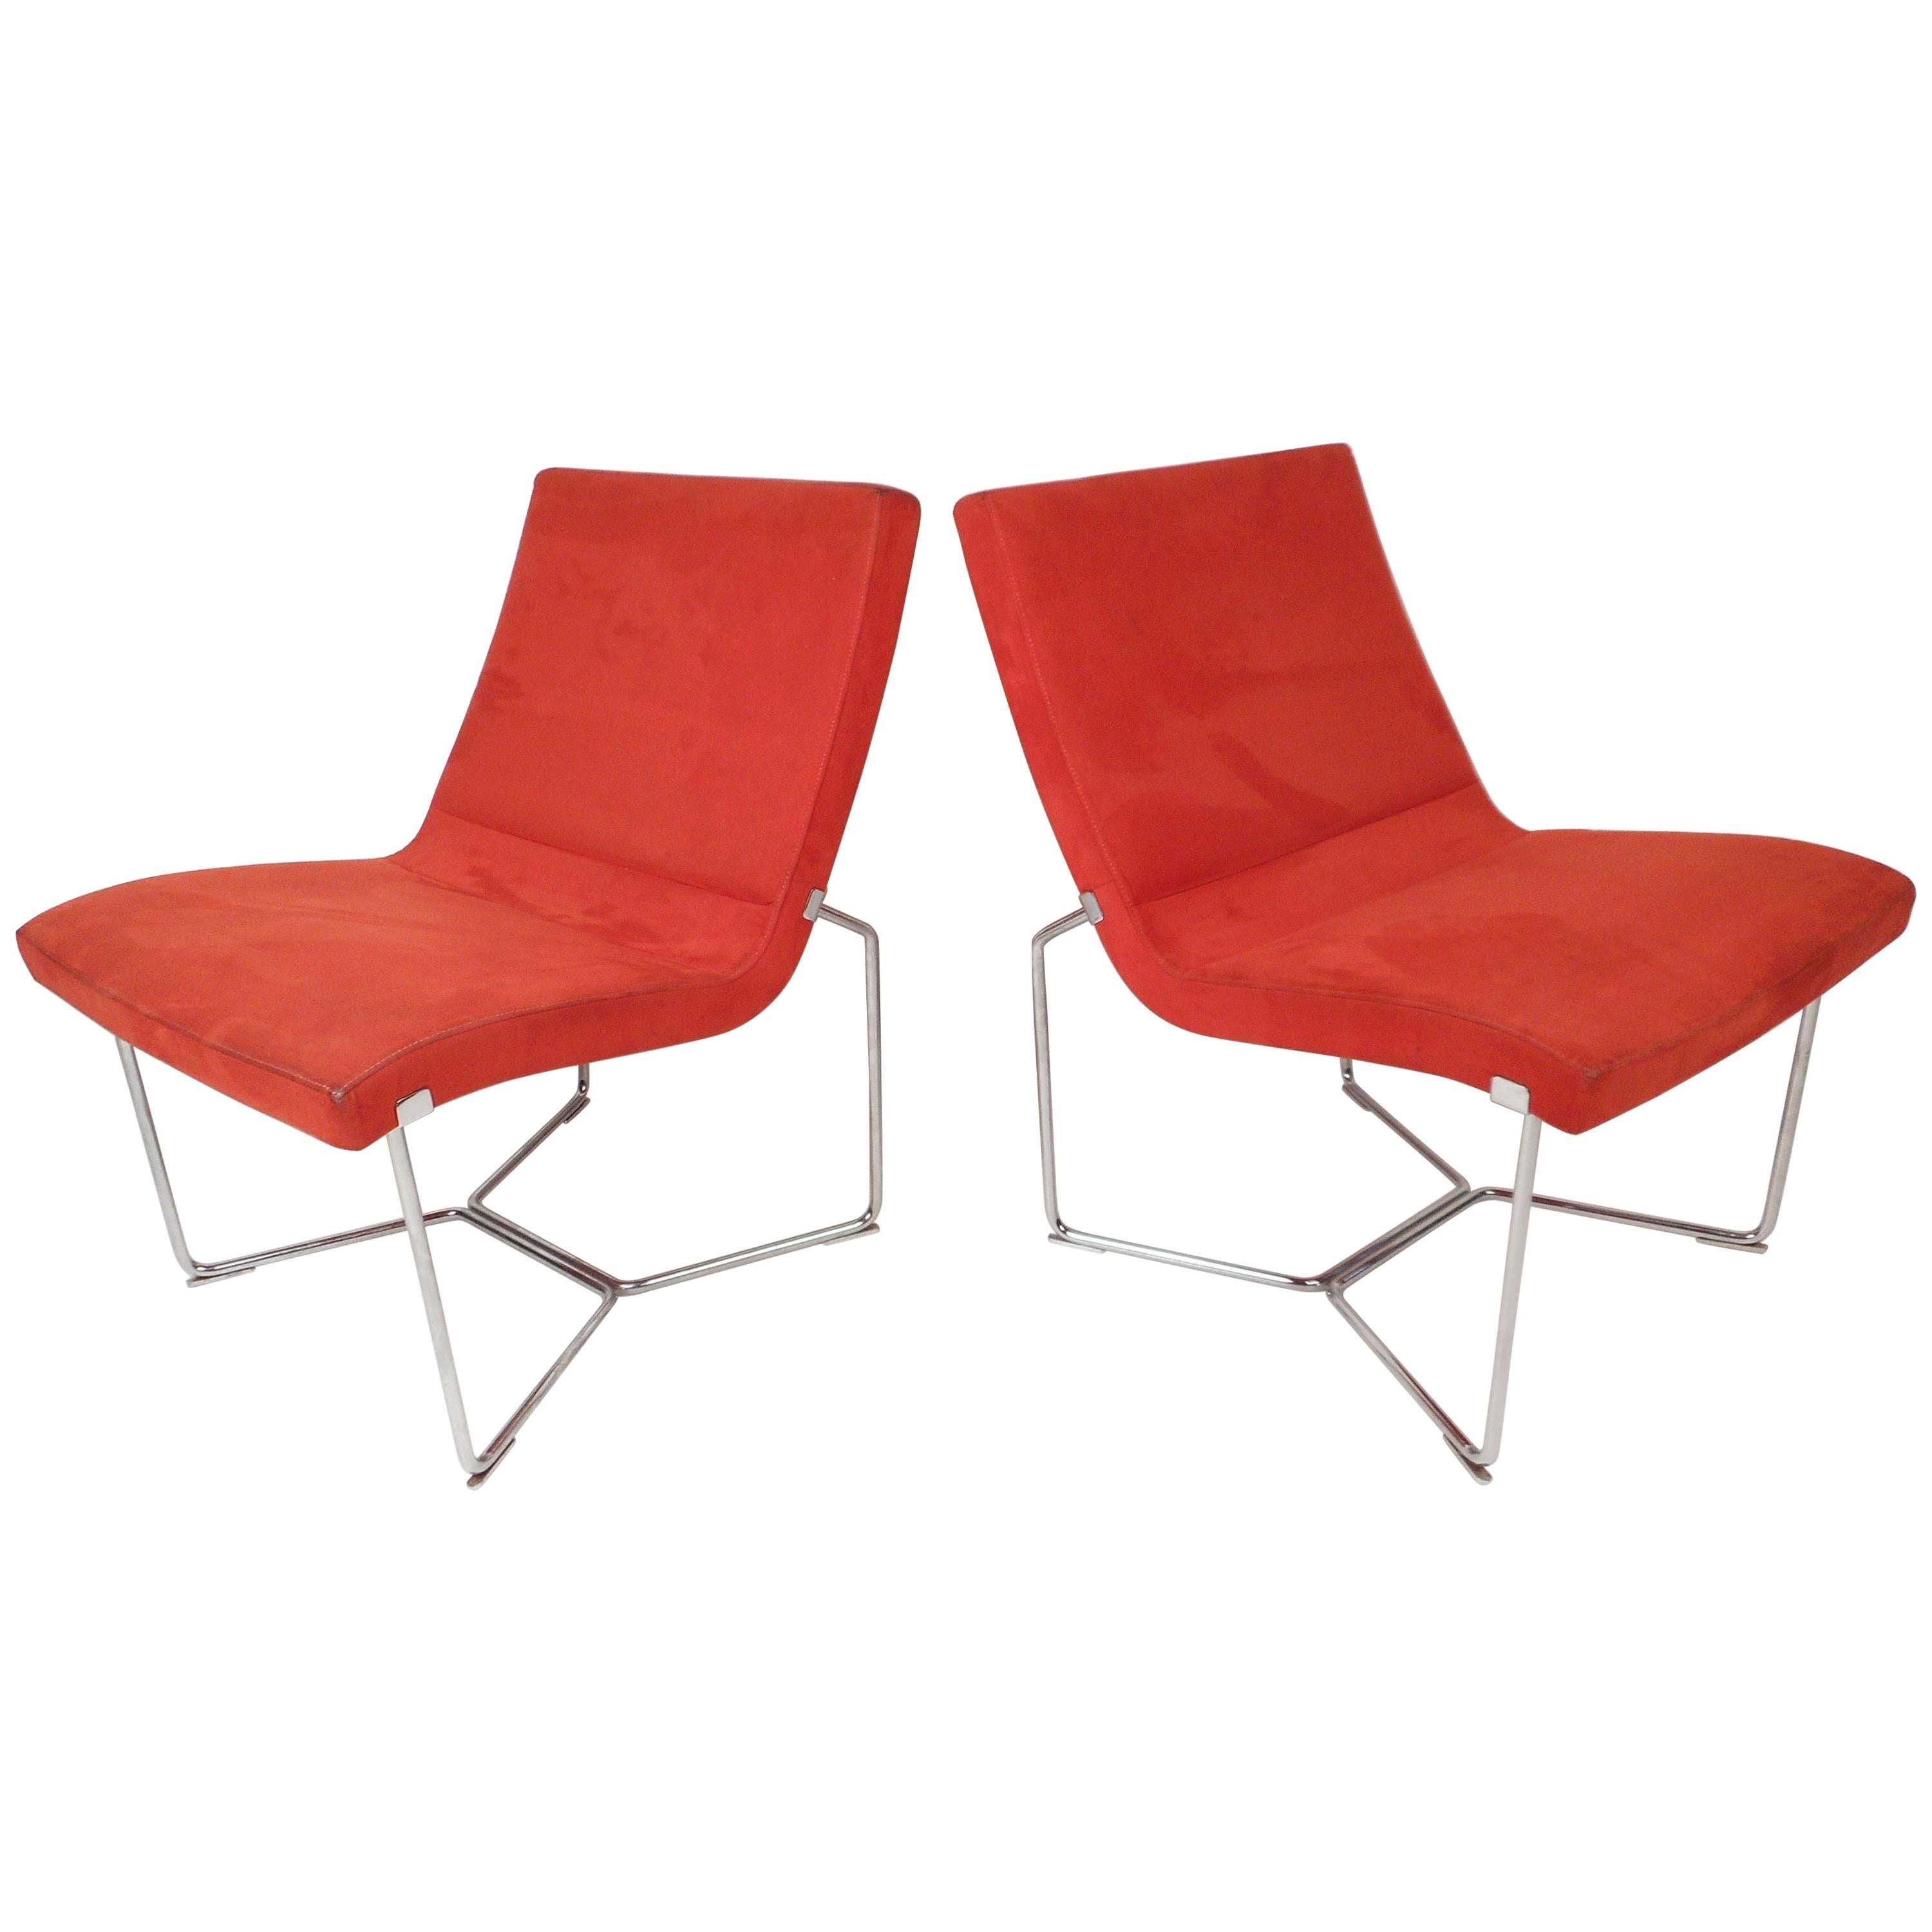 Pair of Contemporary Modern Slipper Lounge Chairs